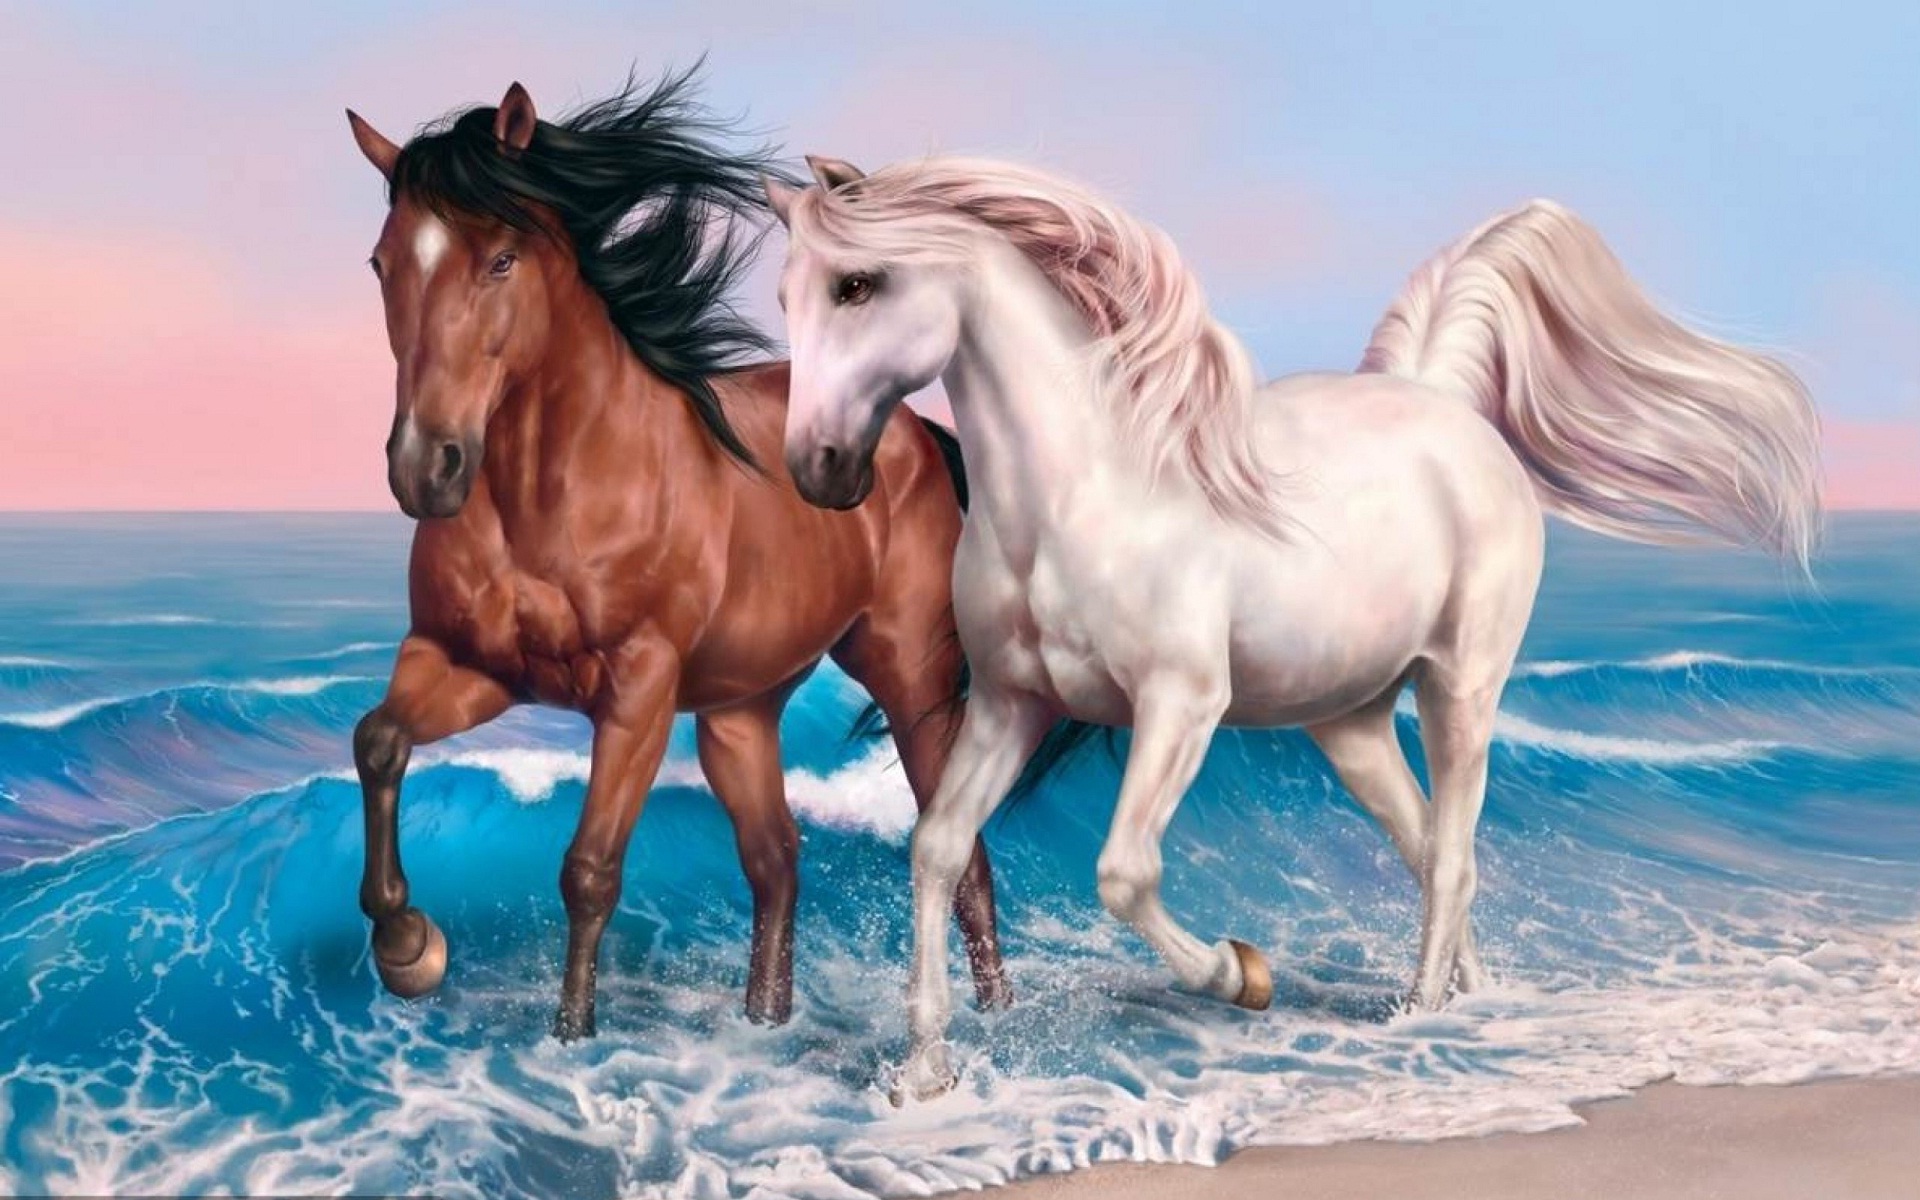 Horse Couple Running On The Beach Hd Photos Images Of White Horses ...